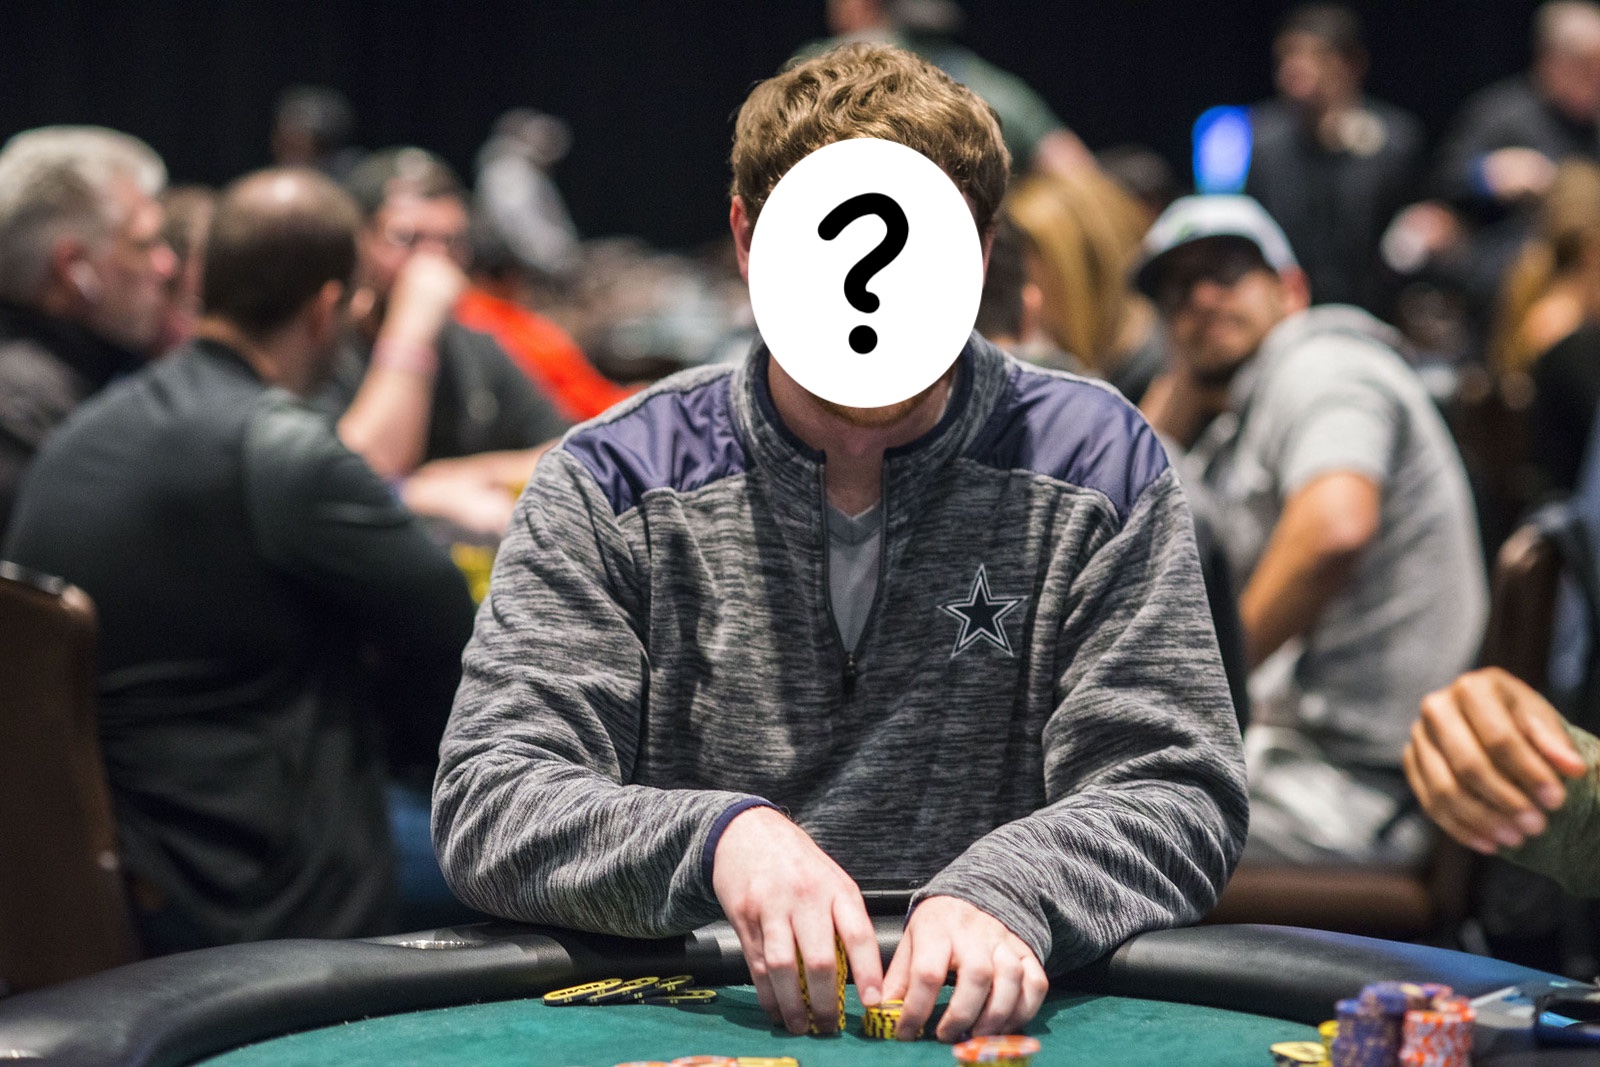 These 5 Pros are the Top Contenders to Win 2021 GPI Player of the Year